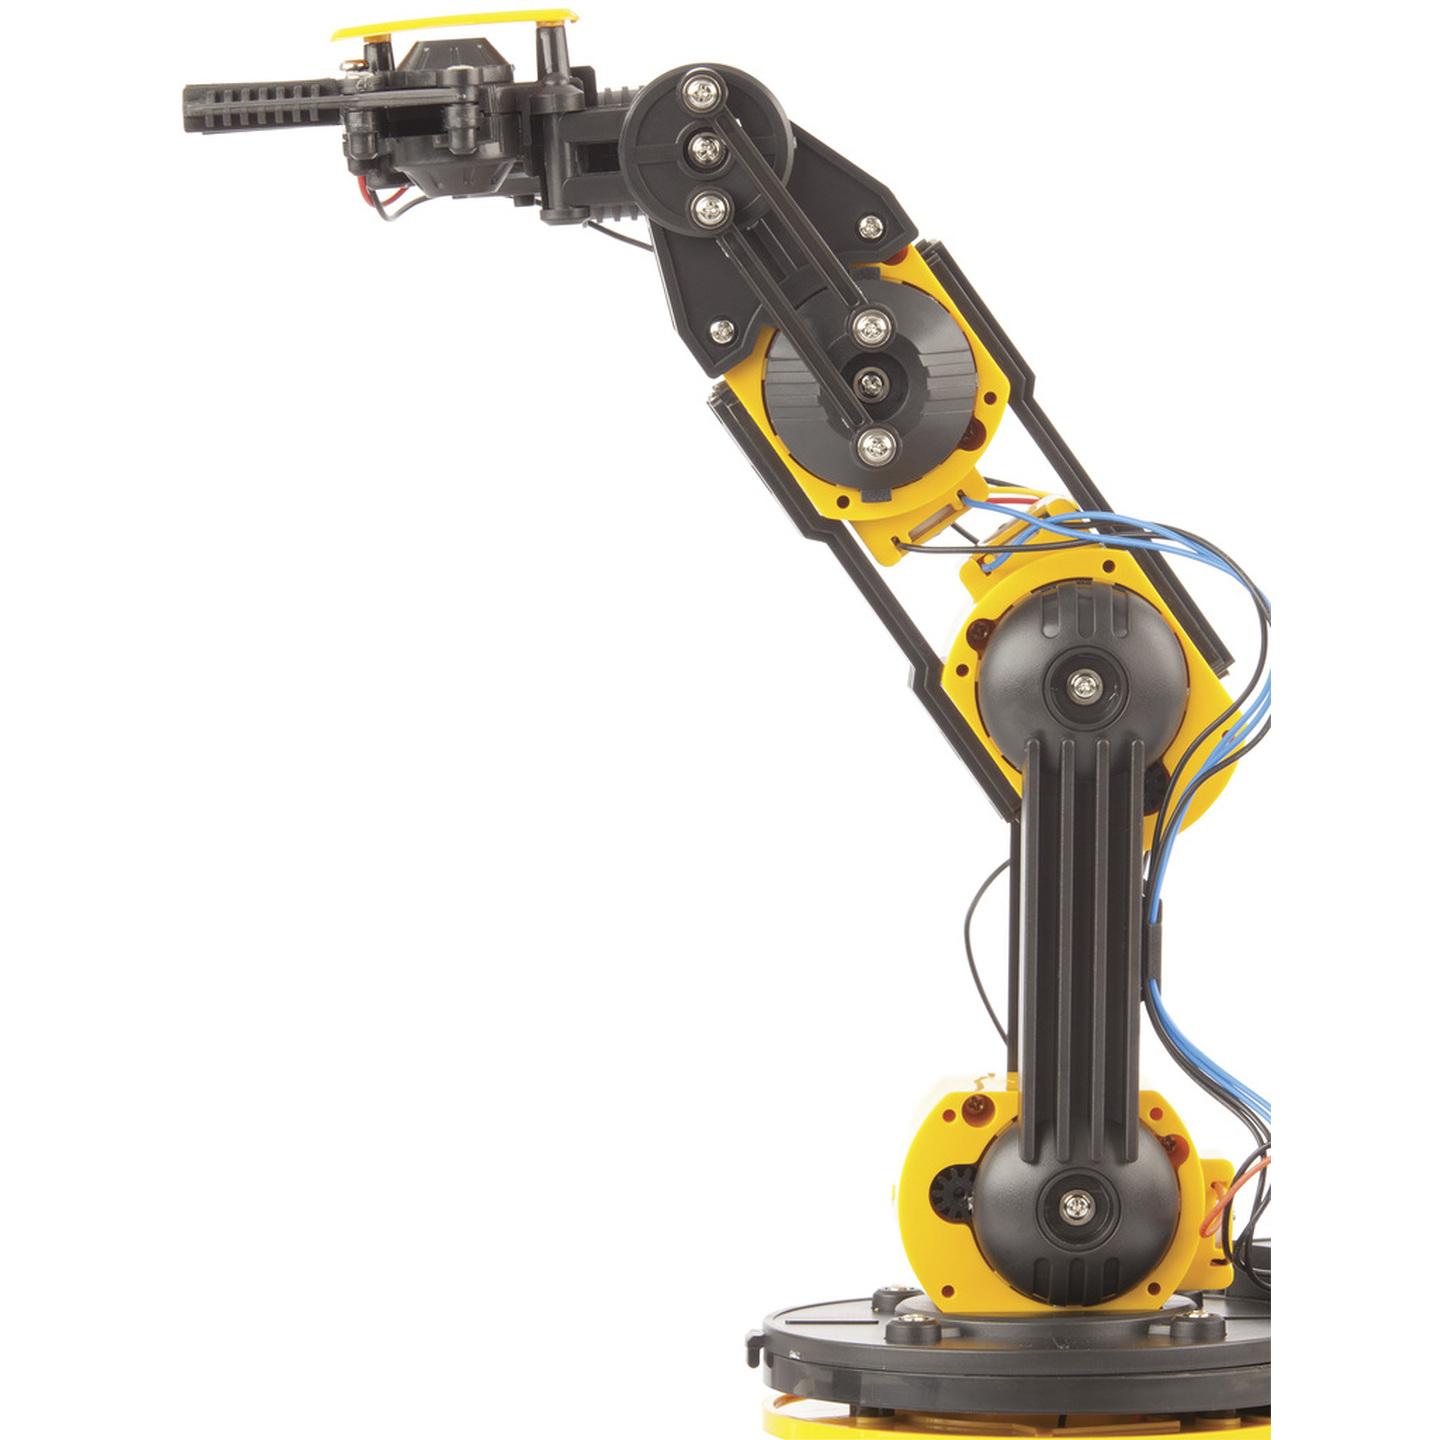 Robot Arm Kit with Controller